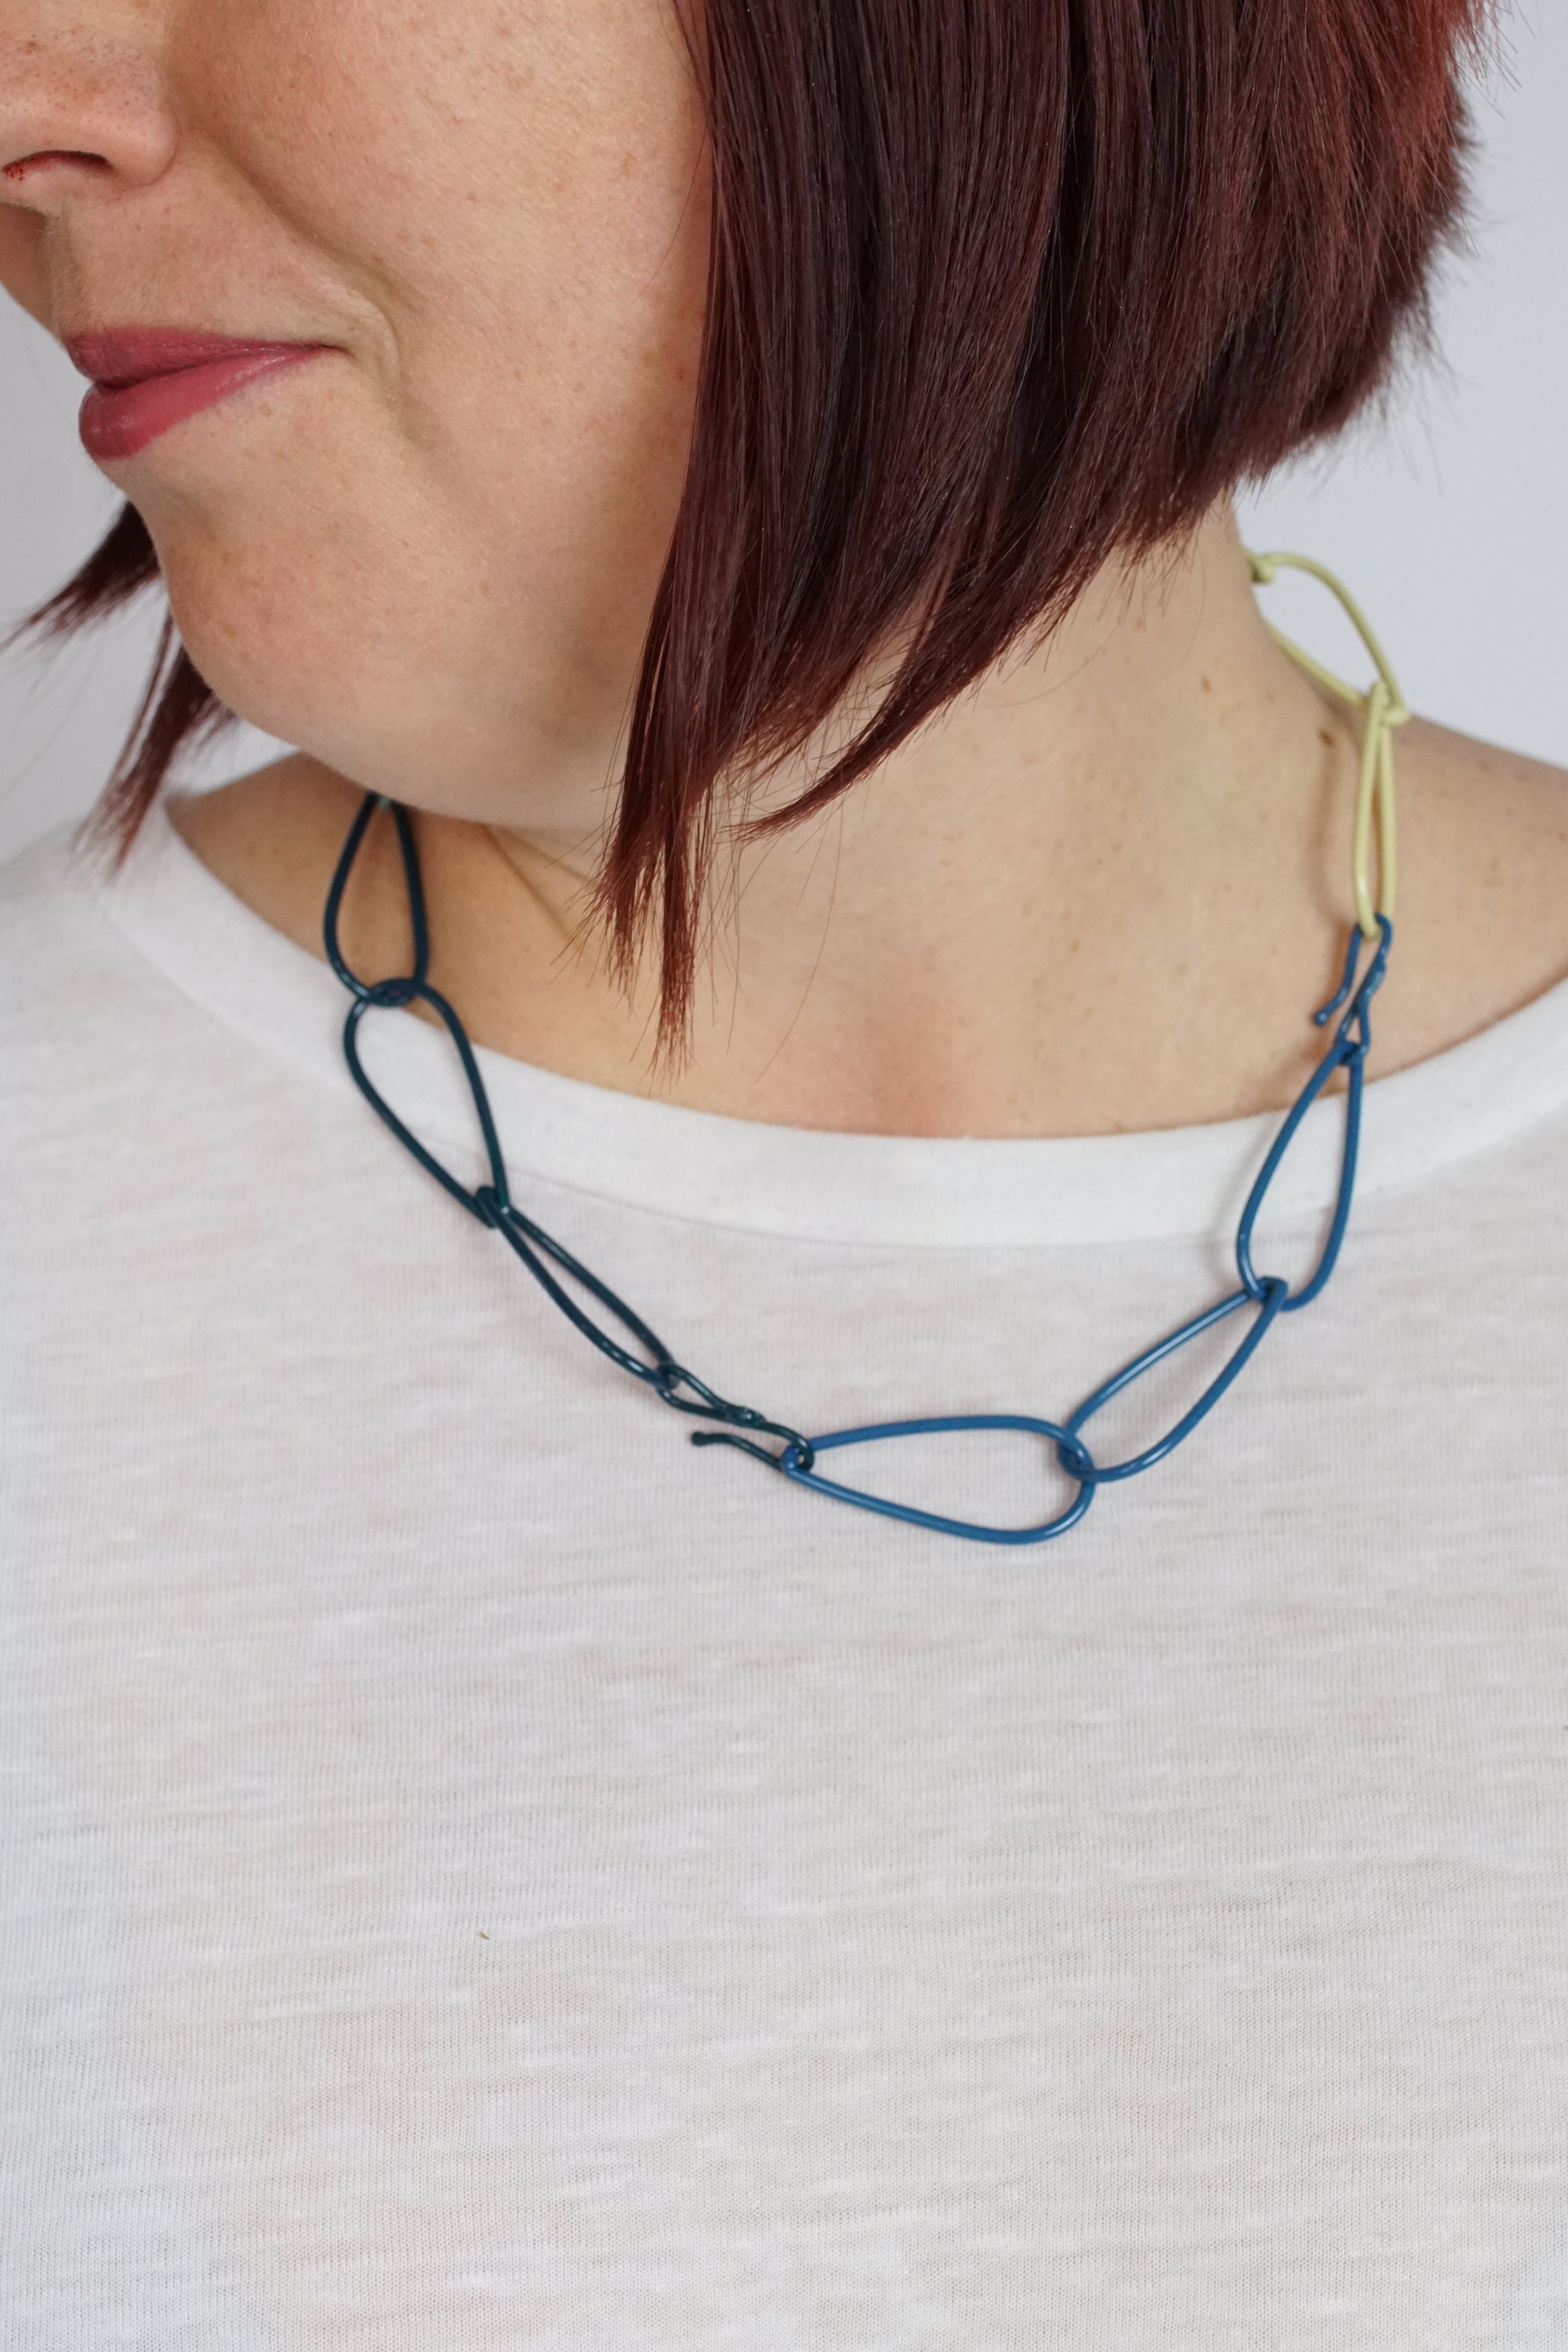 Modular Necklace in Deep Ocean, Azure Blue, Faded Teal, and Green Sand